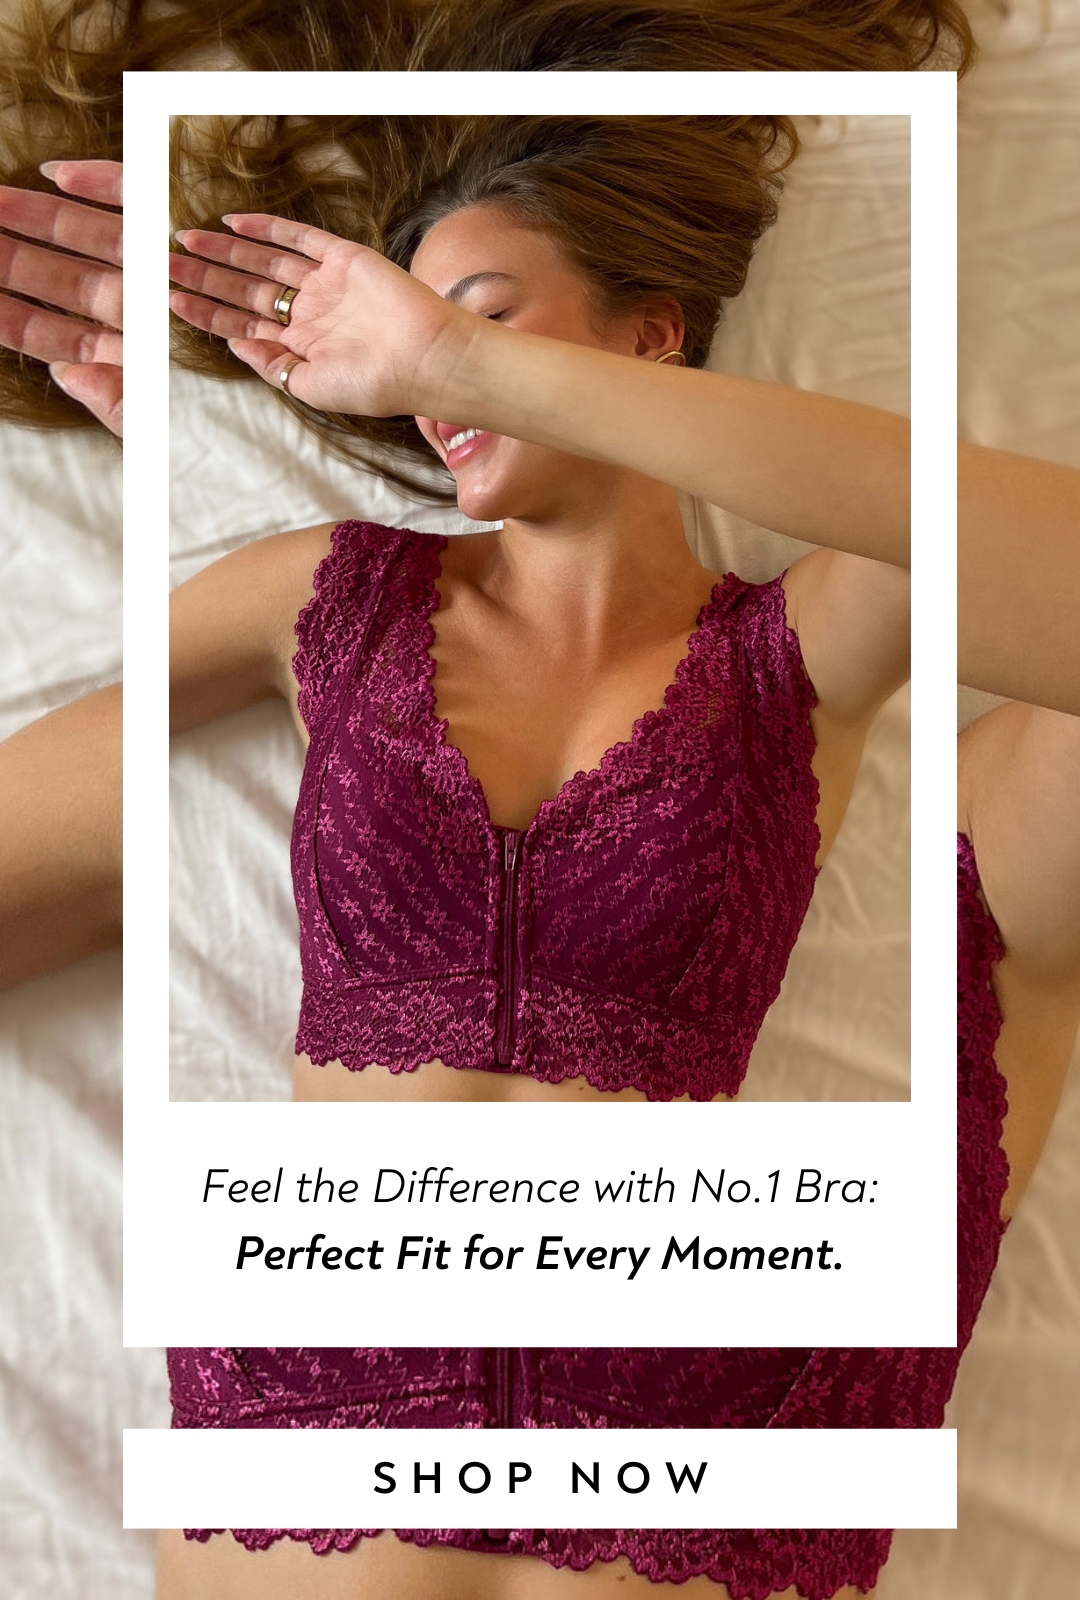 Feel the Difference with No.1 Bra: Perfect Fit for Every Moment.